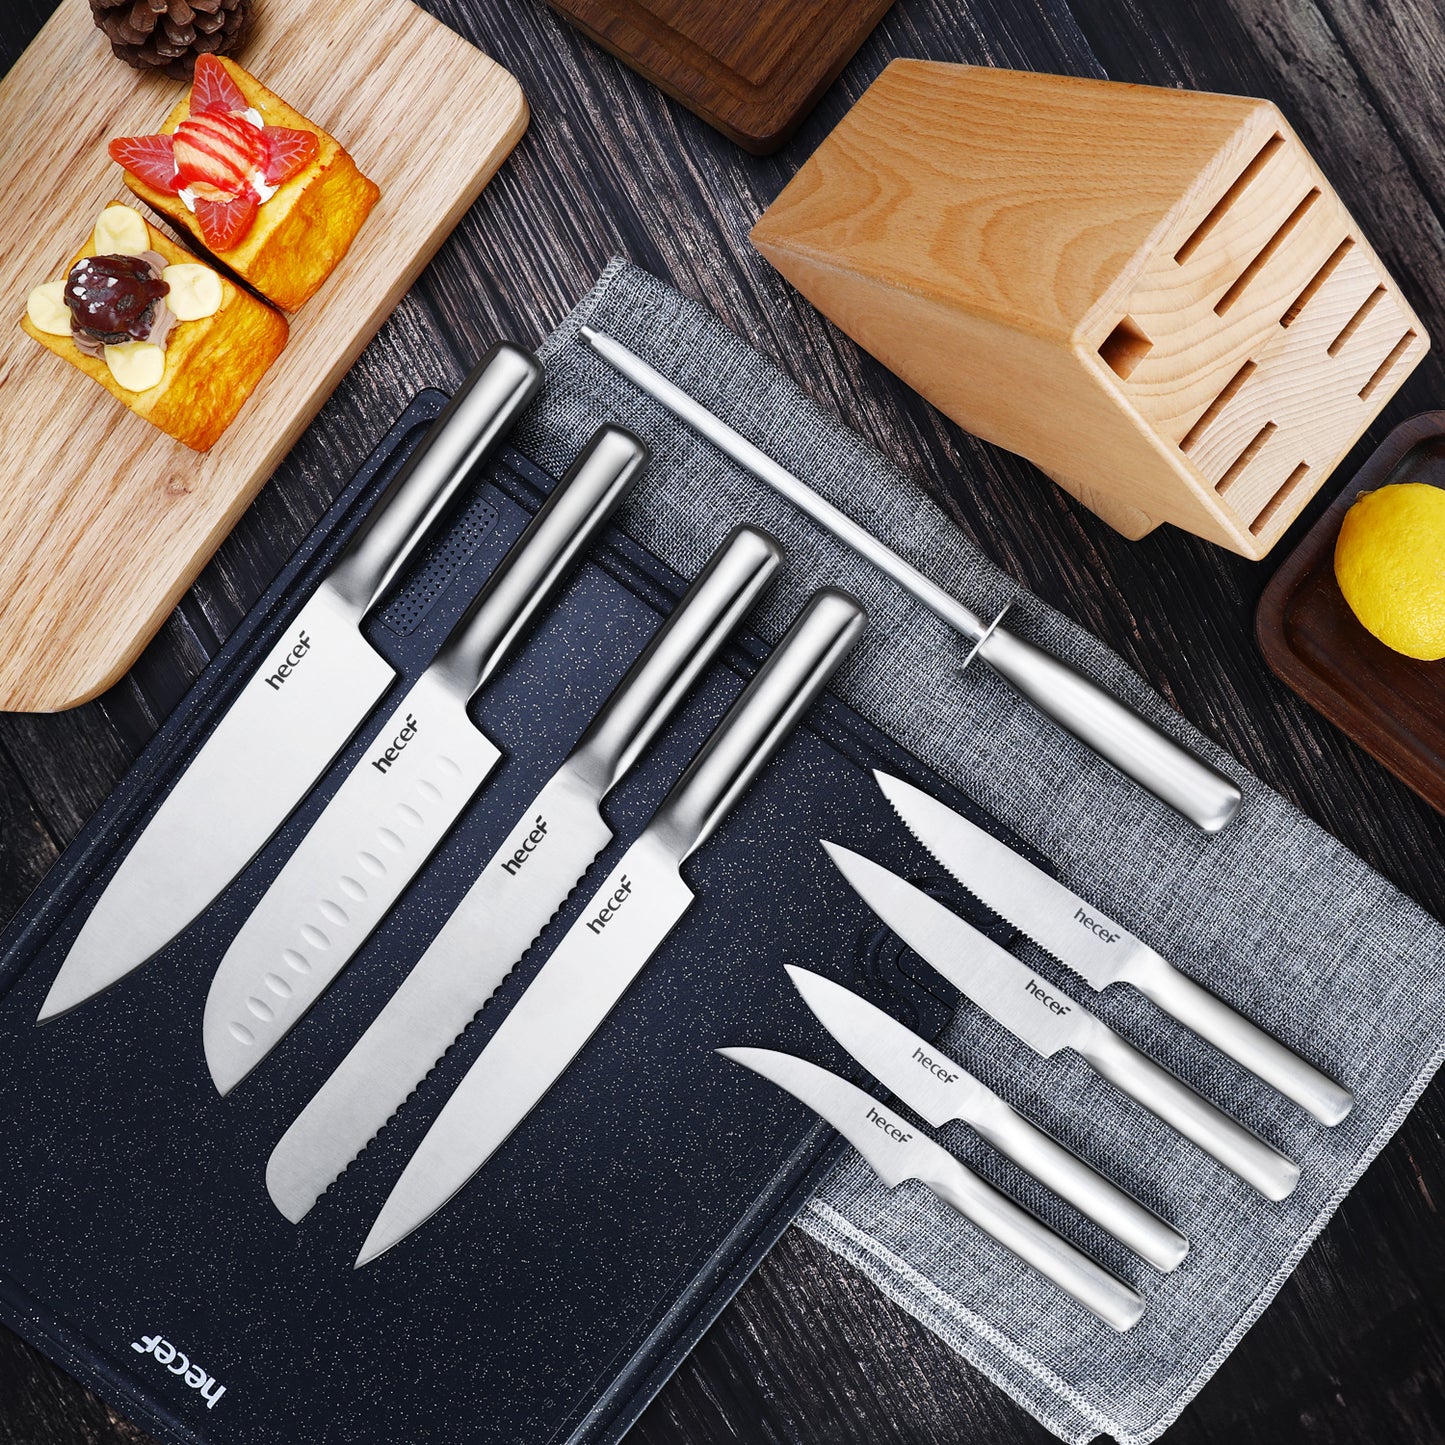 hecef Kitchen Knife Set with Magnetic Strip, 6 pcs Professional Knives Set  for Kitchen, 13-inch Magnetic Strip Stainless Steel Sharp Chef Knife Set